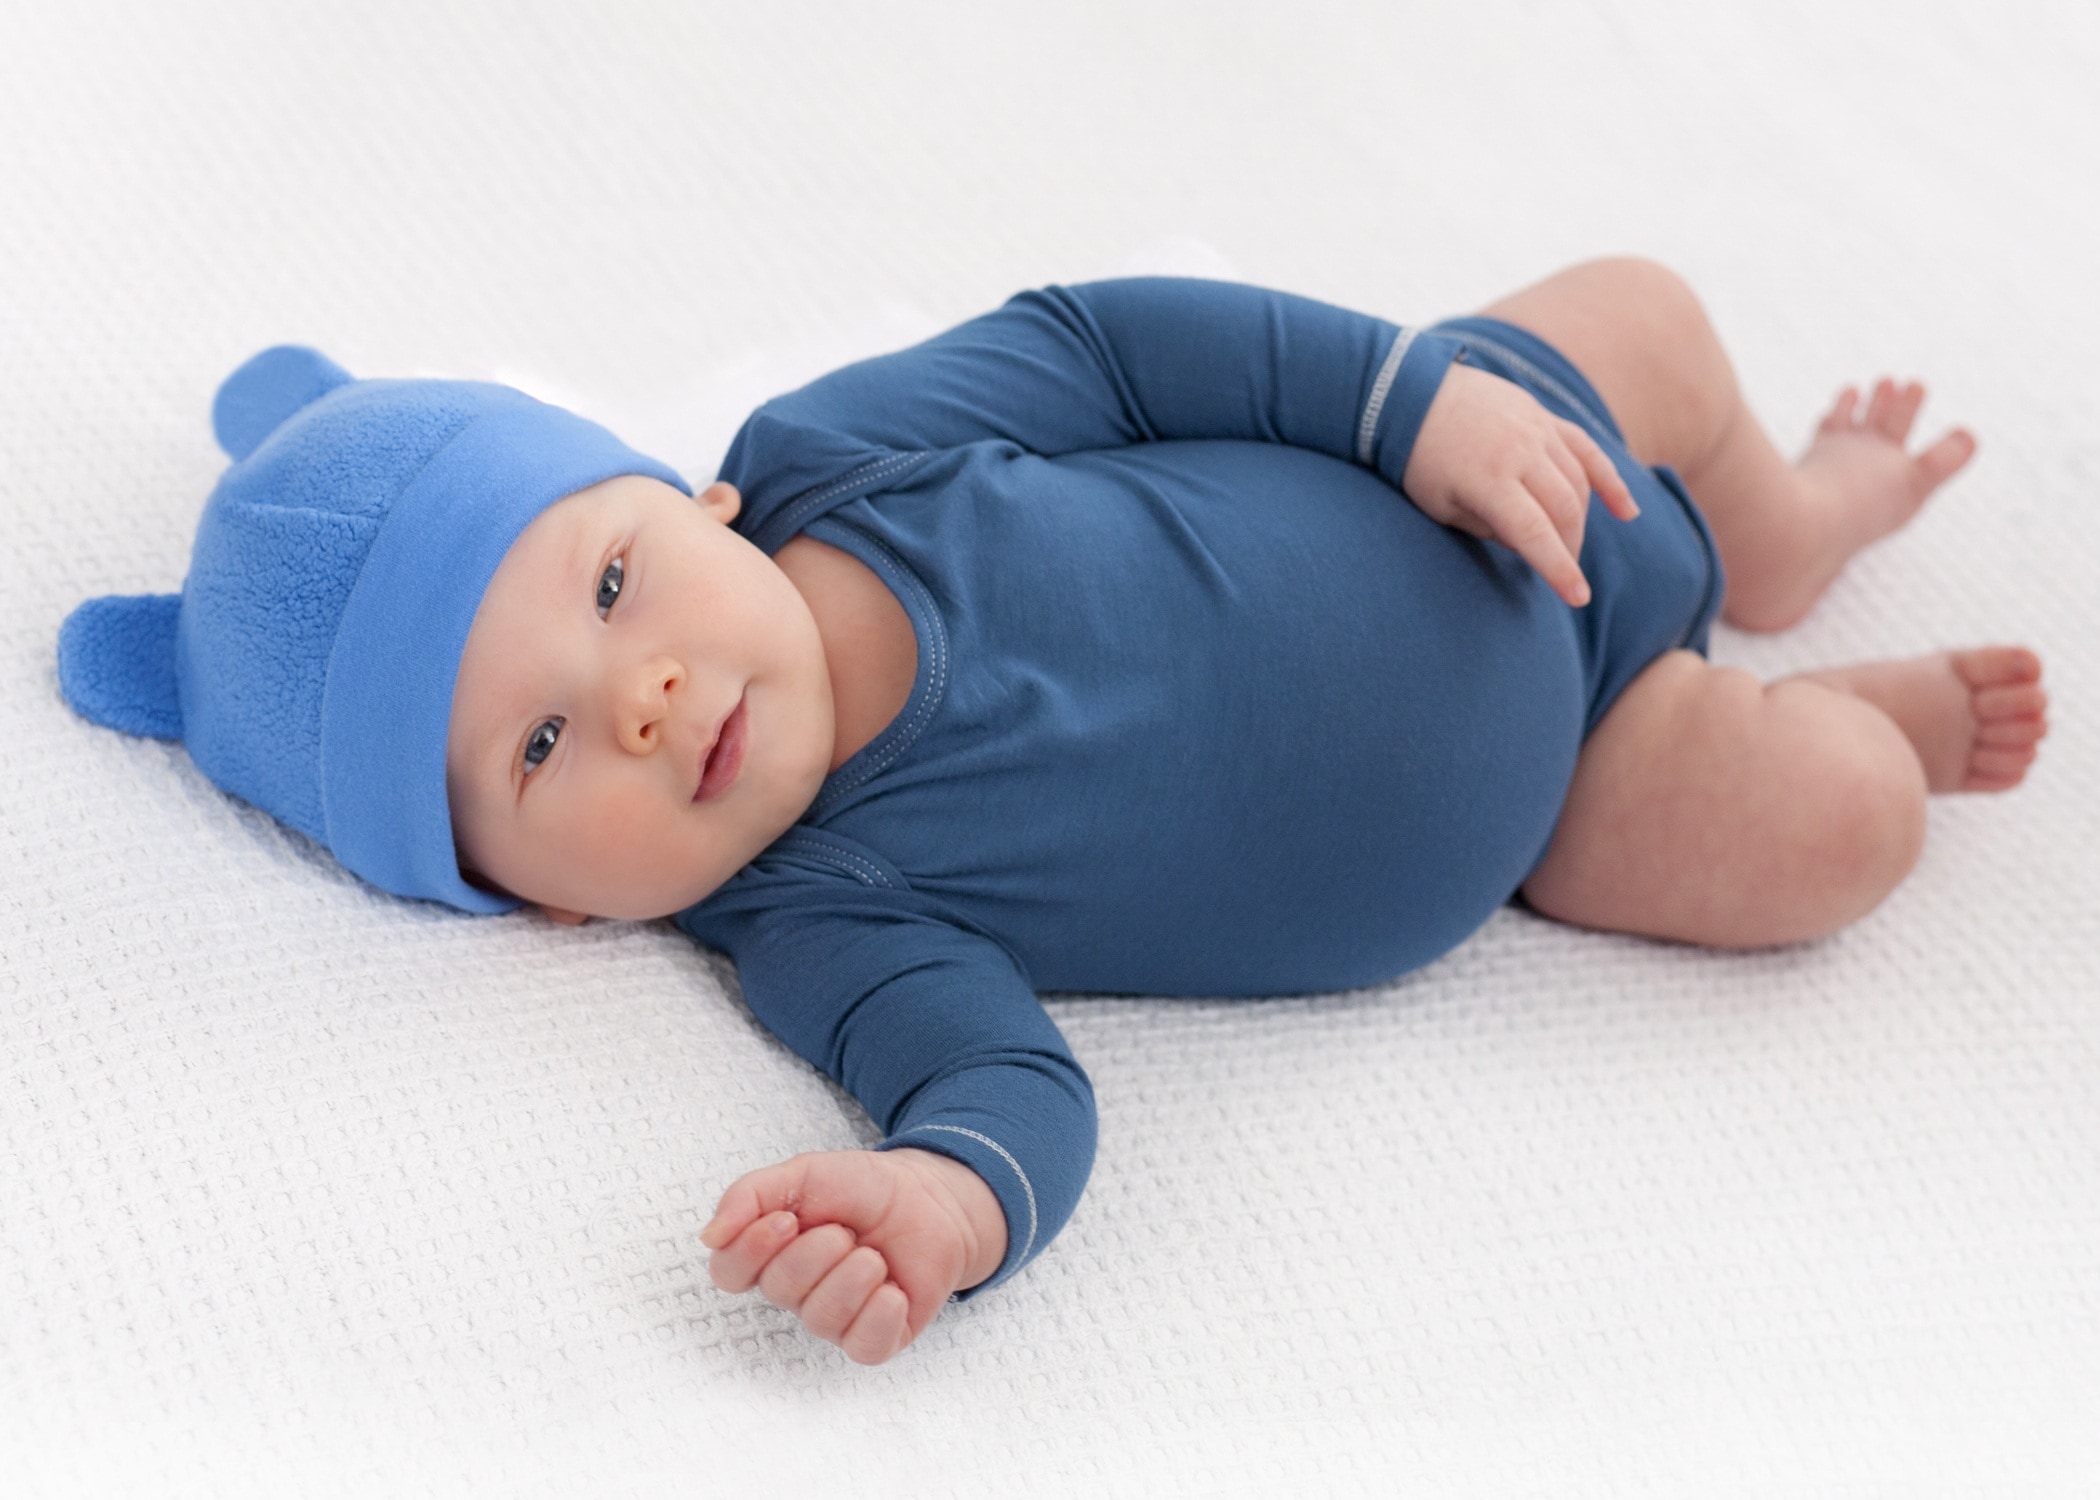 photo of baby wearing blue hat and gray onesie lying on bed